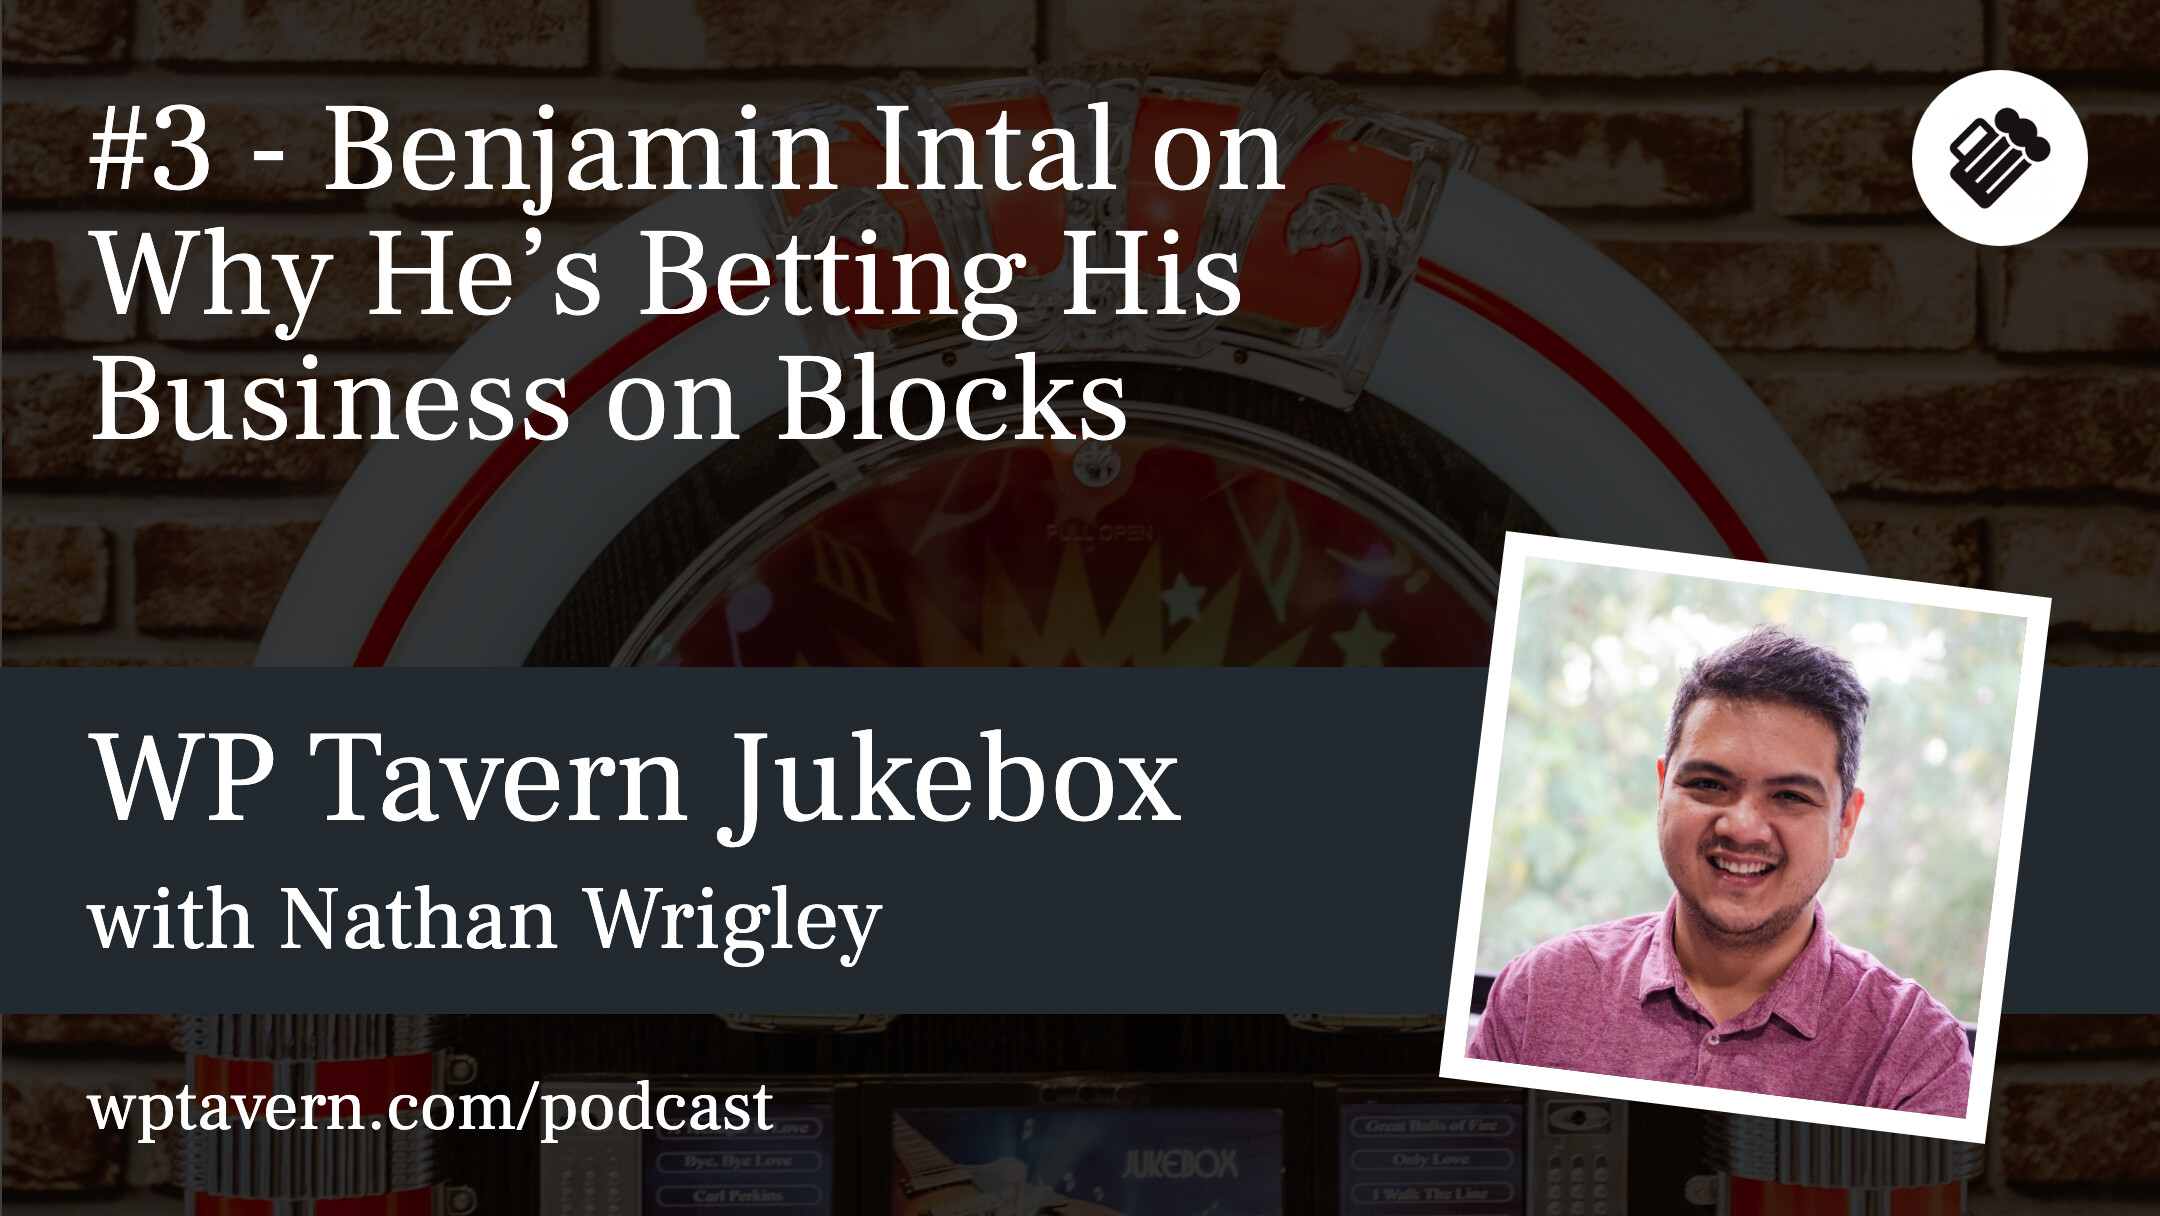 #3 - Benjamin Intal on Why He’s Betting His Business on Blocks